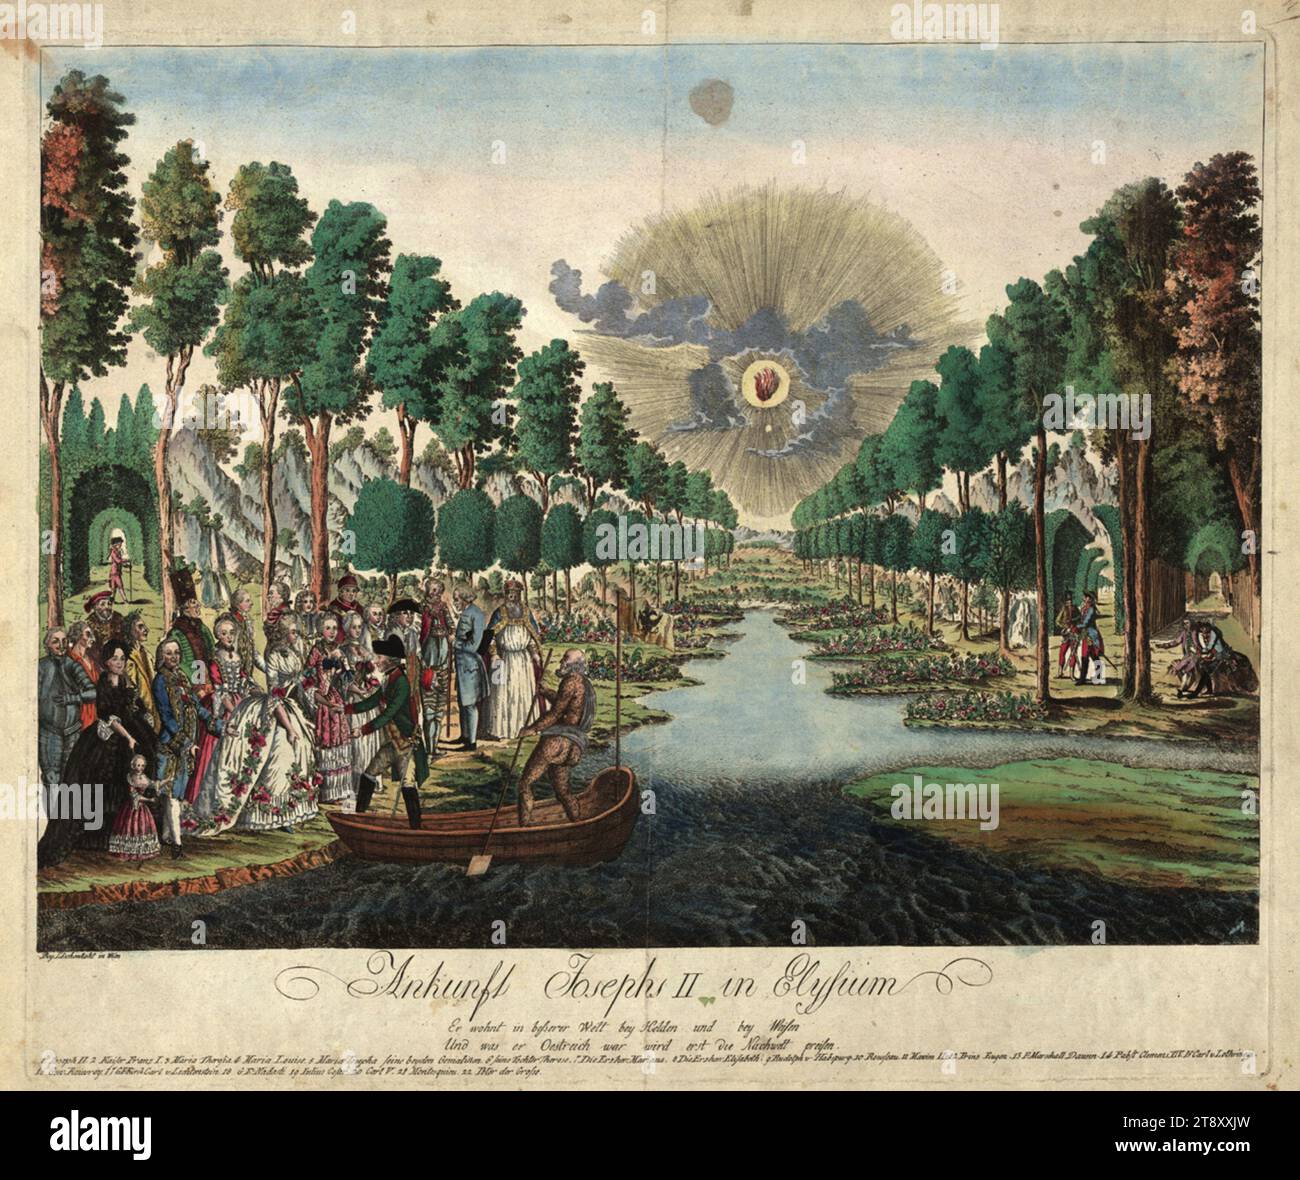 Arrival of Joseph II in the Elysium' (Allegorical representation after the death of Joseph II on 20 Feb 1790), Johann Hieronymus Löschenkohl (1753-1807), publishing house, 1790, paper, colorised, copperplate engraving, sheet size 45×53, 5 cm, plate size 40, 3×47, 7 cm, Inscription, li. u.: Bey Löschenkohl in Vienna; Mi. u.: Arrival of Joseph II in Elysium, He dwells in a better world with heroes and with wise men Stock Photo